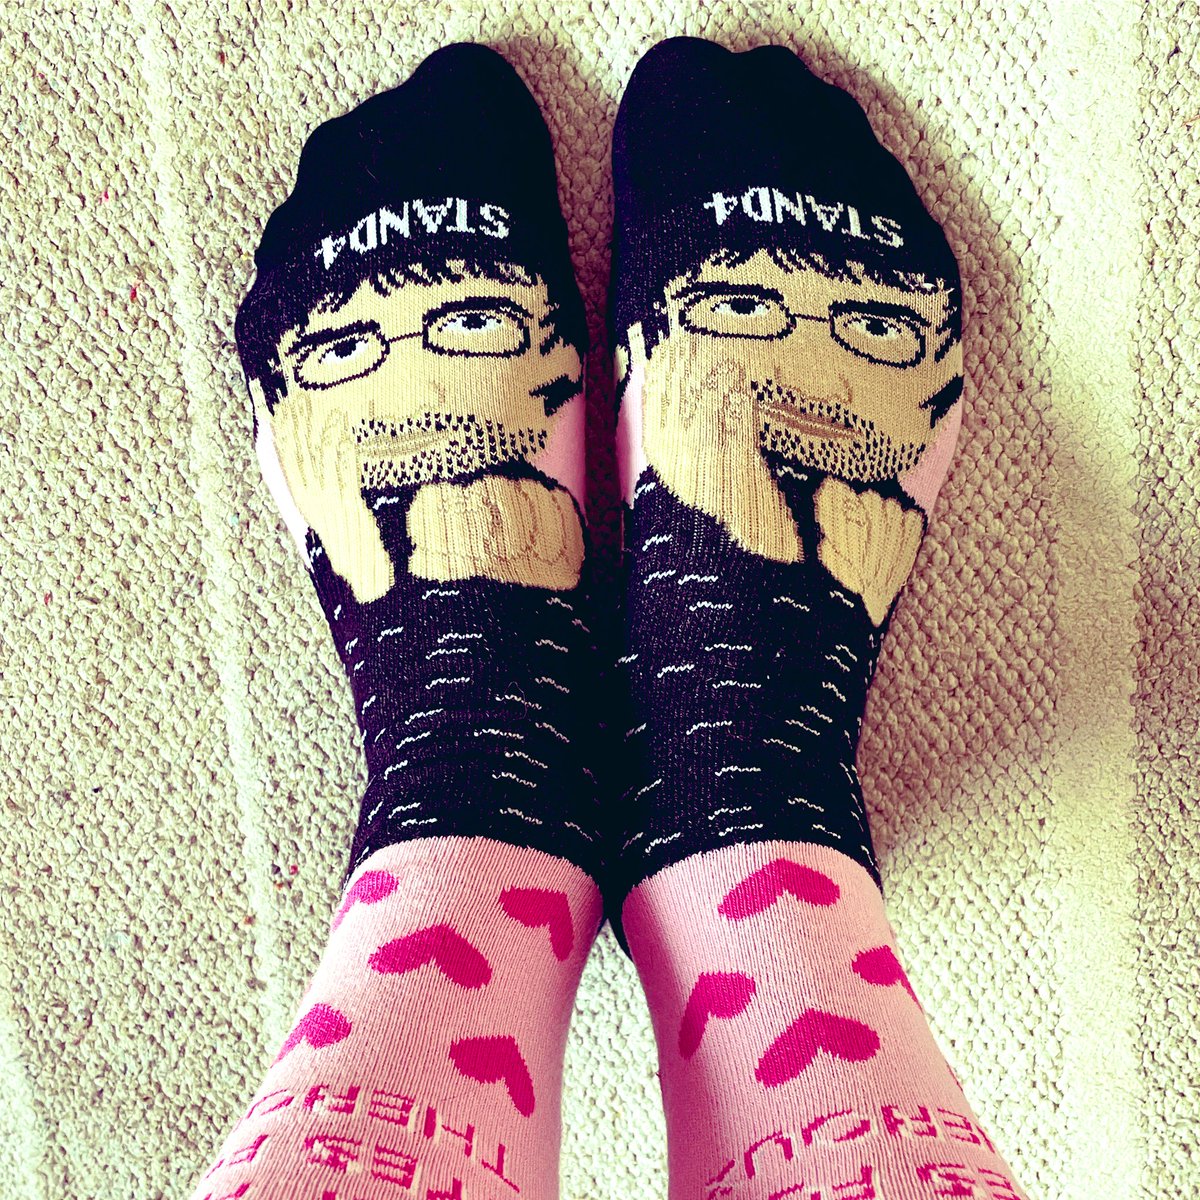 The wife bought me #LouisTheroux socks for #ValentinesDay and I couldn’t love her any more if I tried.